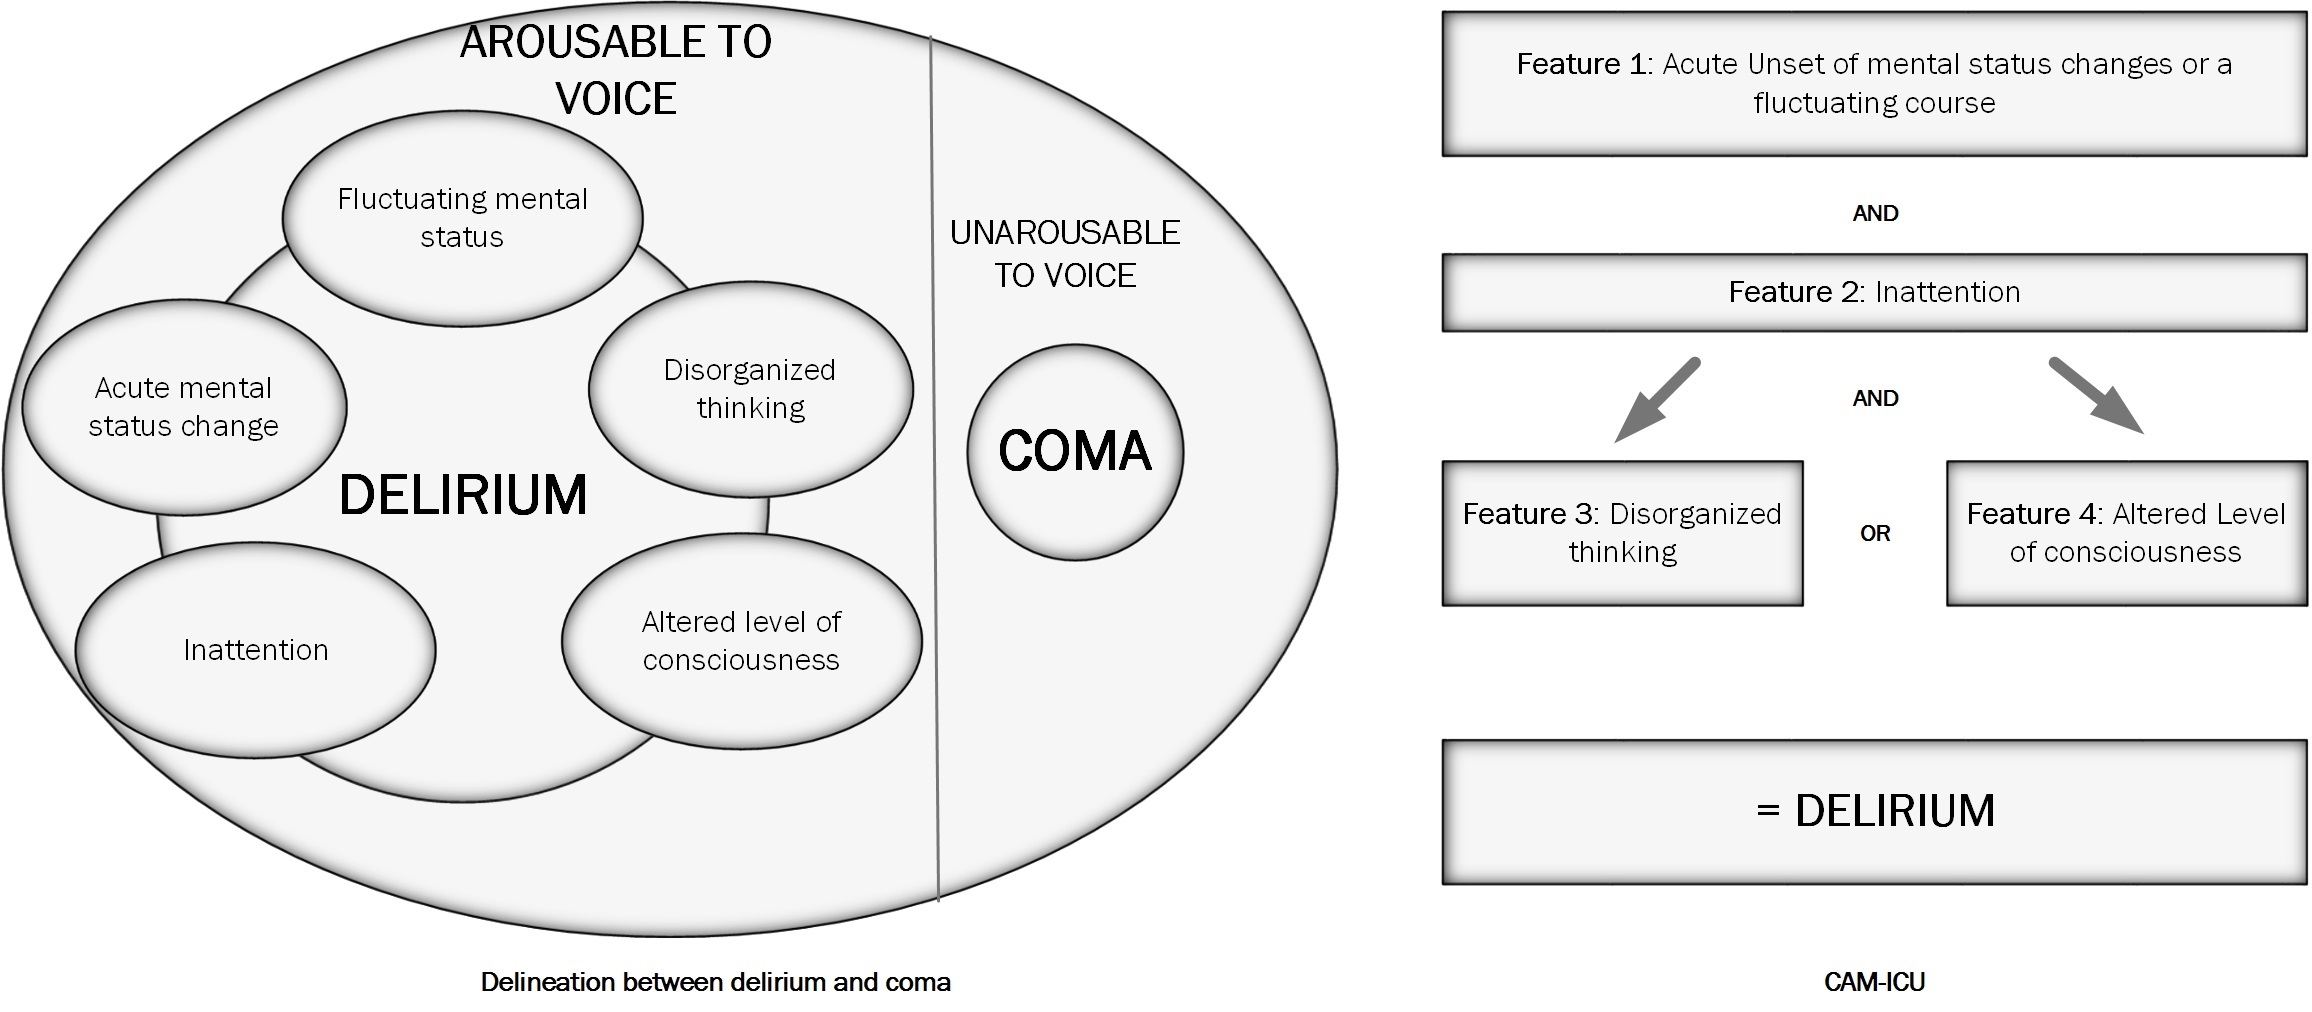 Delineation between delirium and coma and the delirium assessment tool CAM-ICU. 